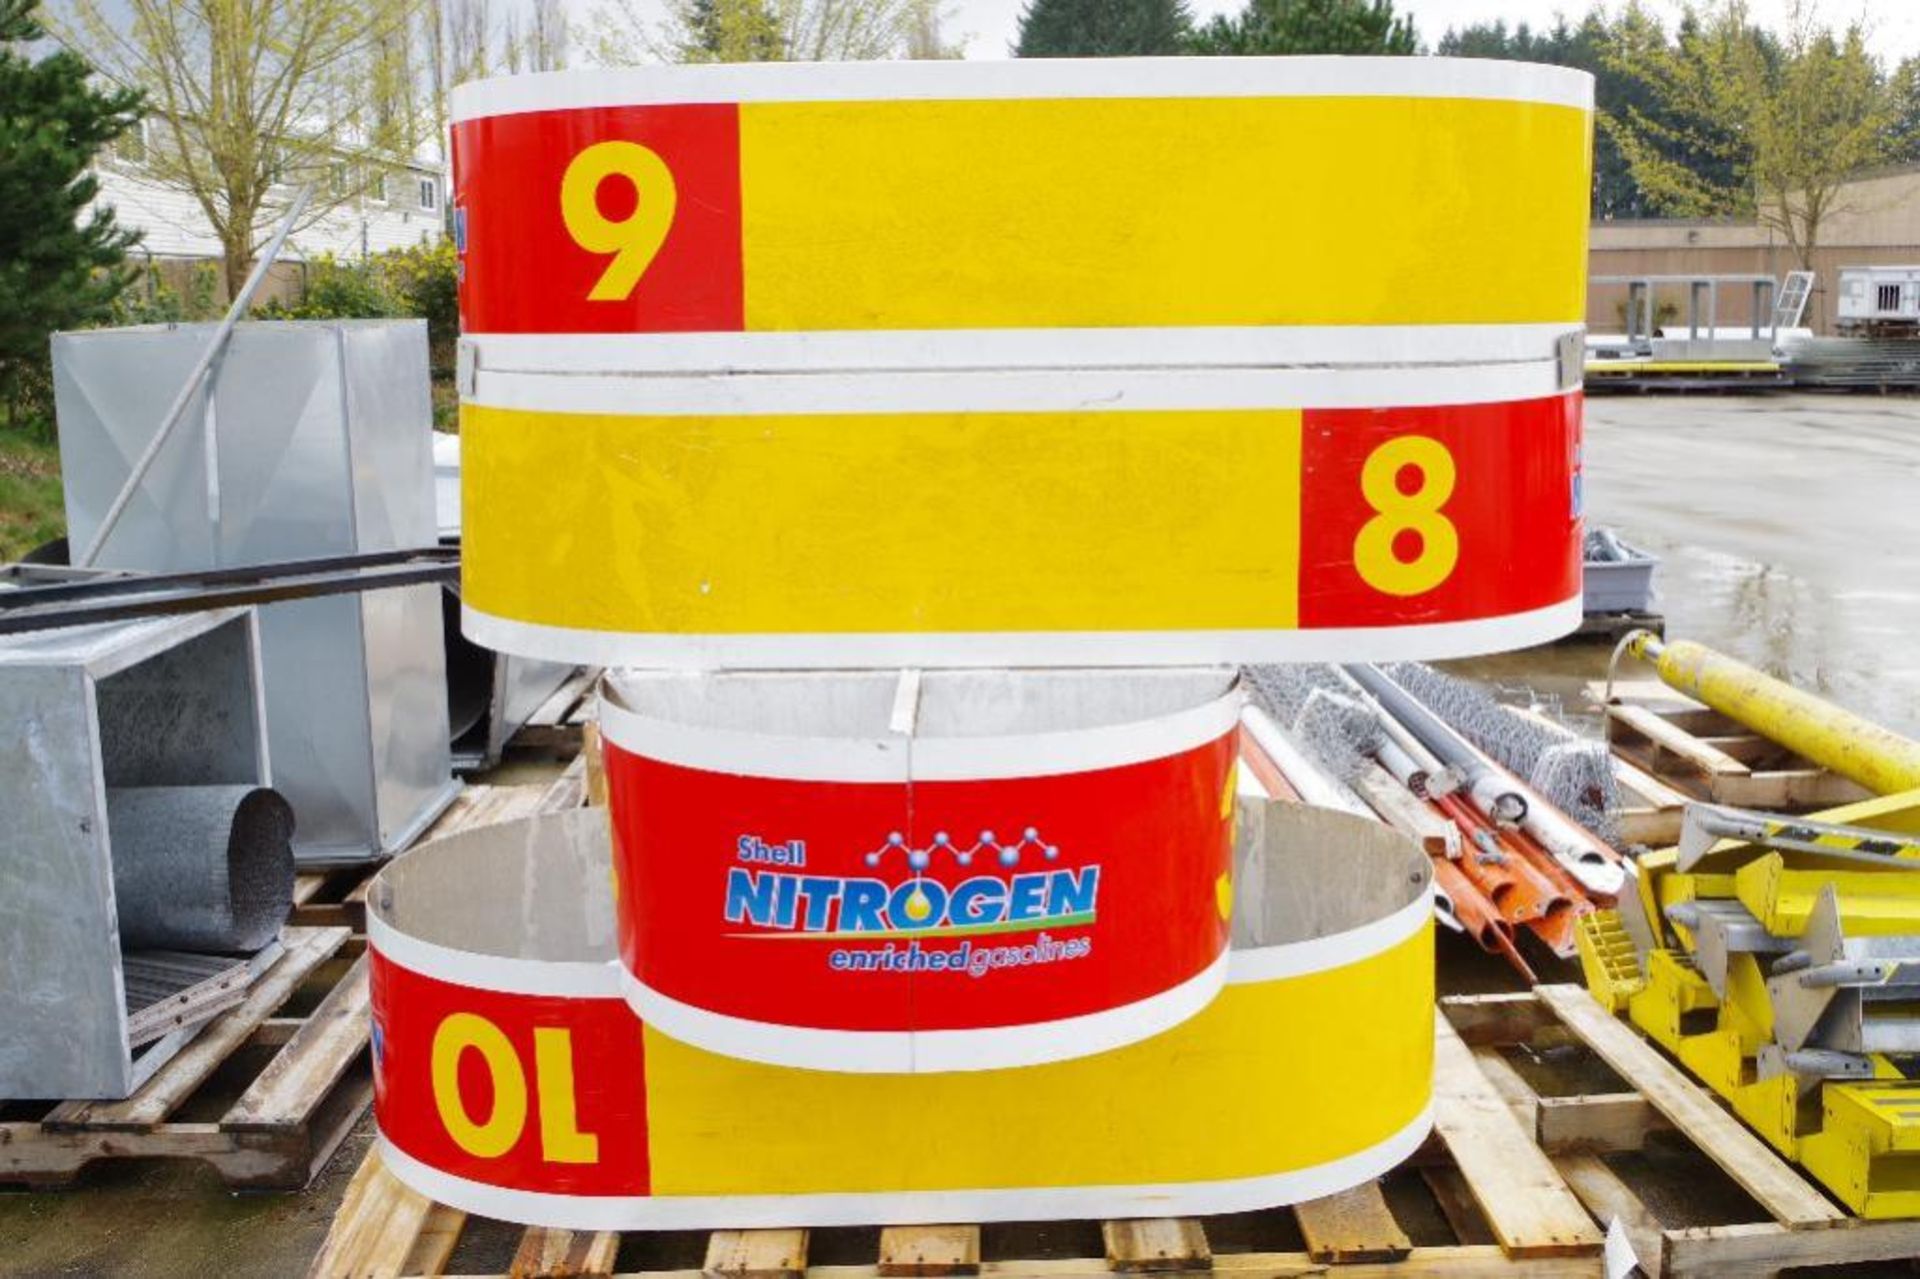 (4) SHELL Fuel Station Wrap Around Signage Pieces - Image 4 of 4